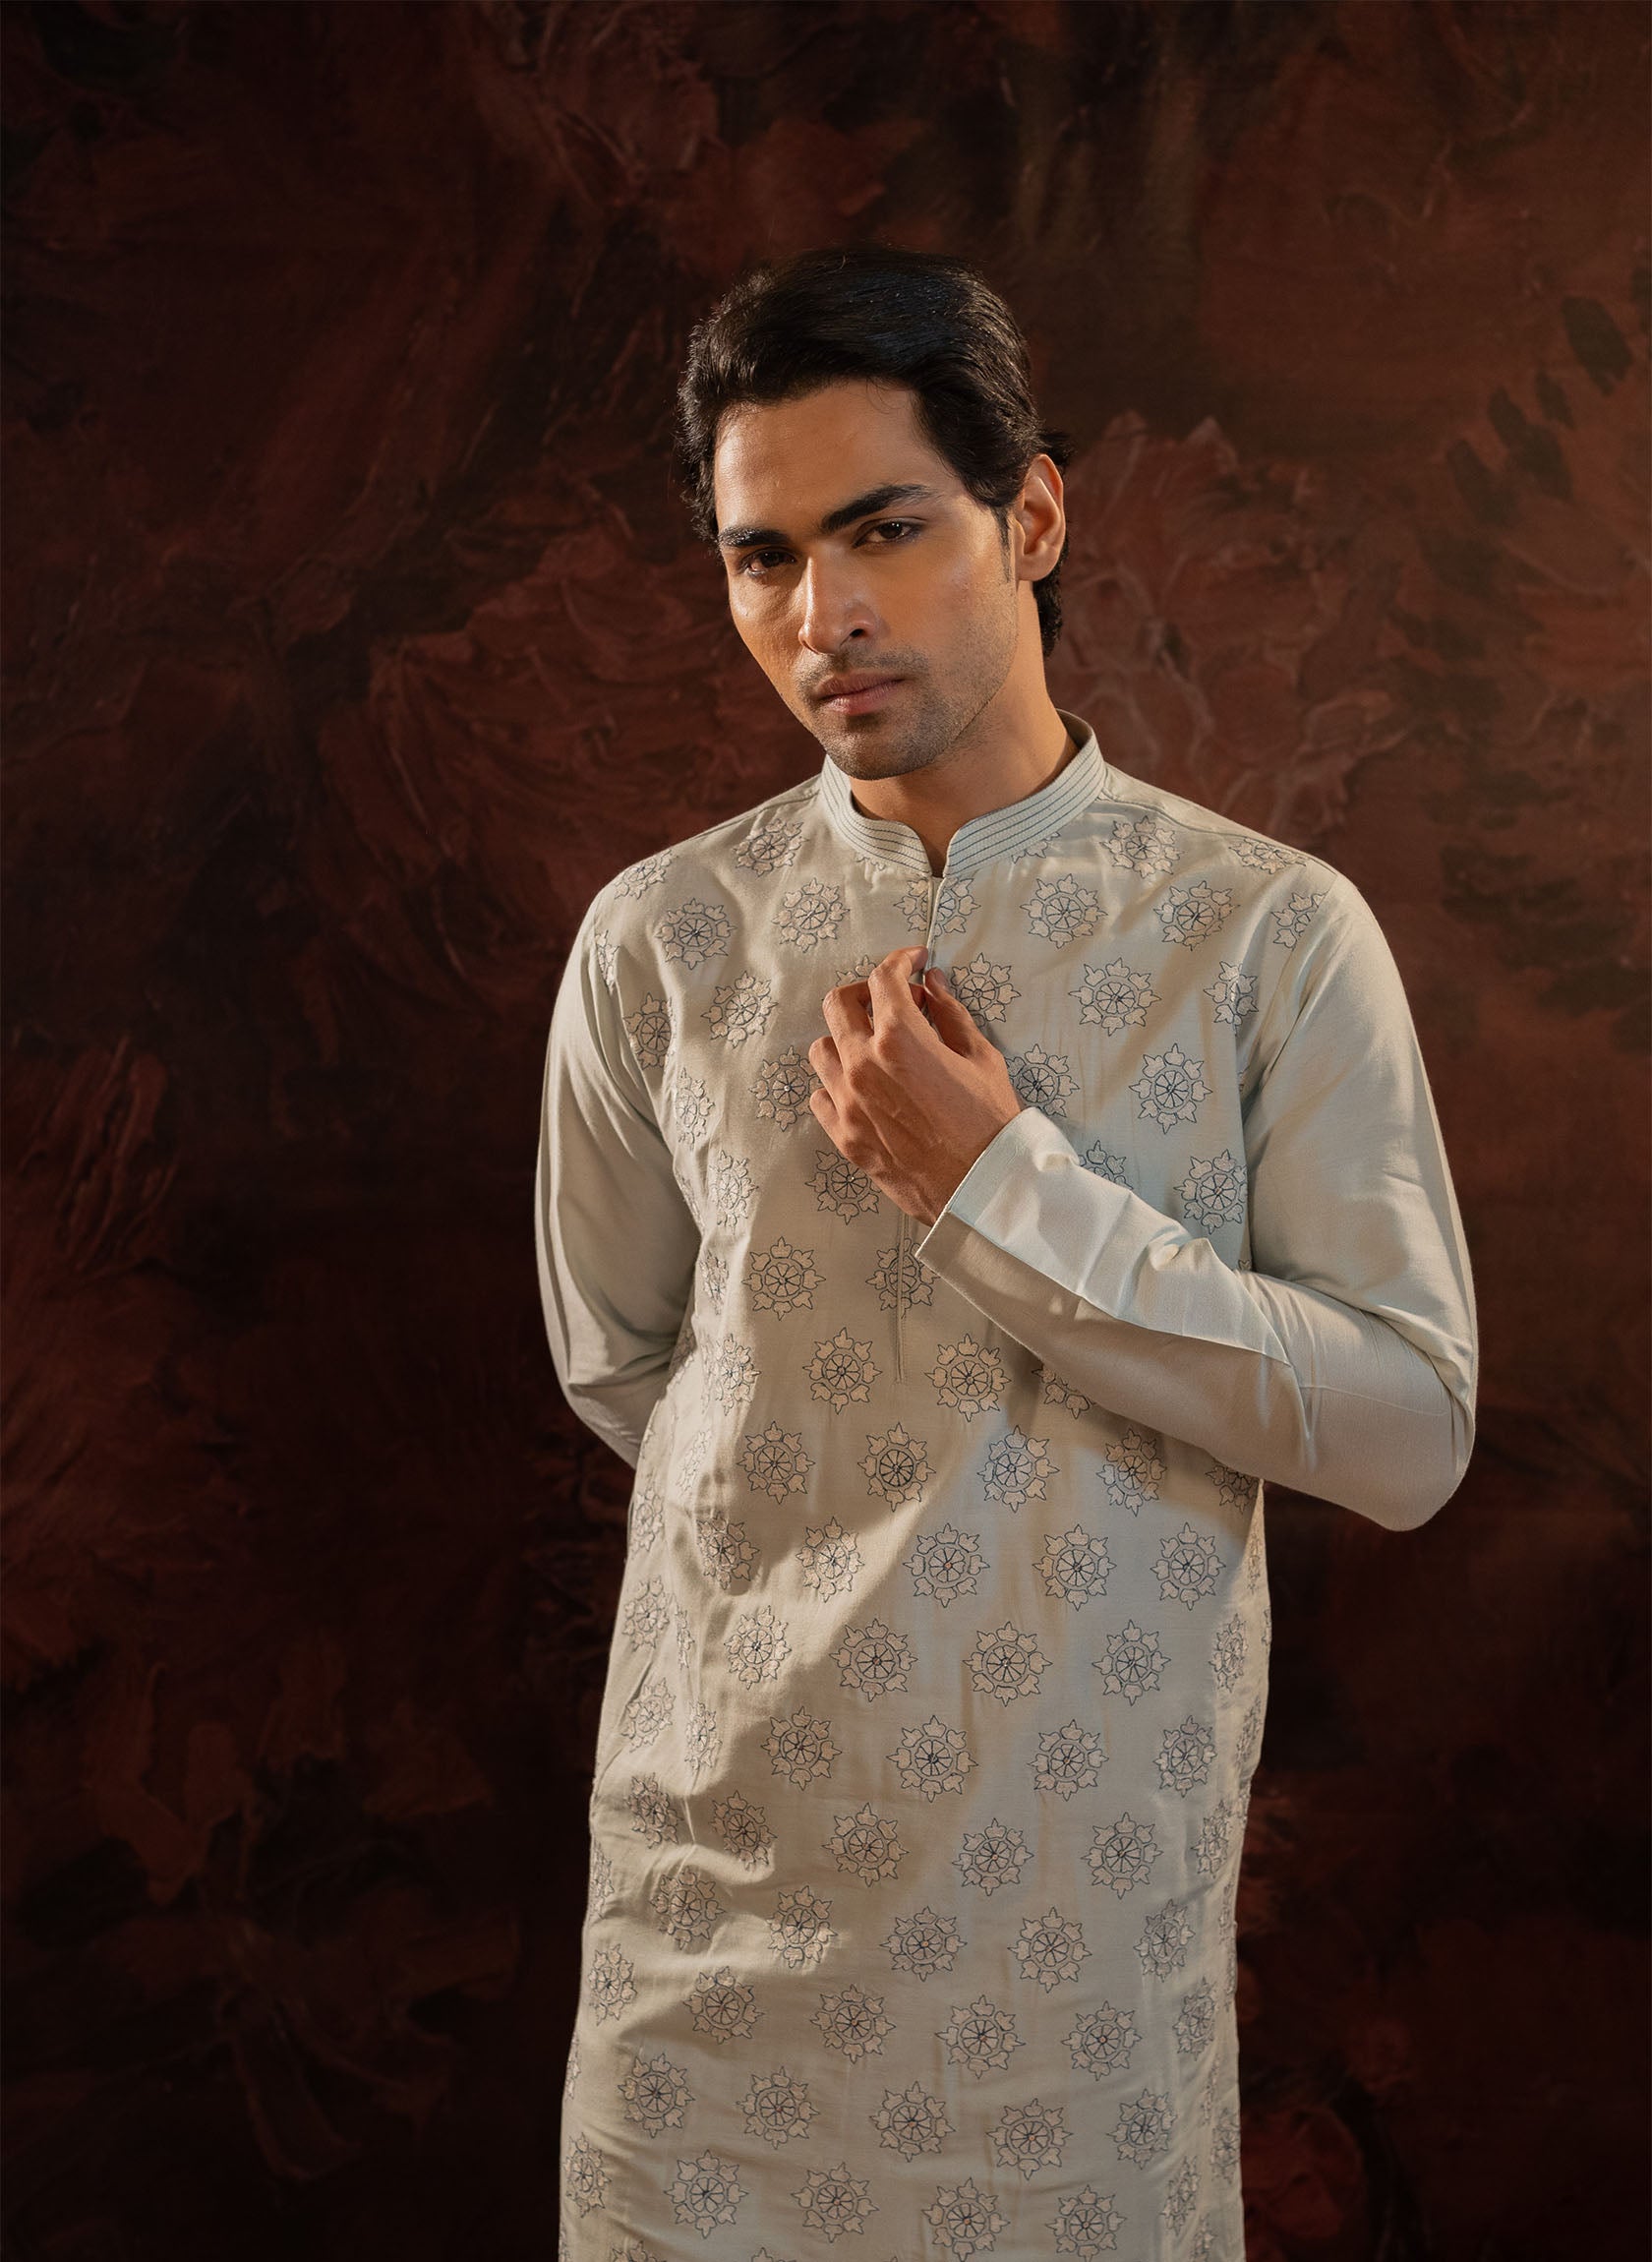 Powder blue cotton silk kurta set with floral embroidered motifs all over. Stitchline detailing on the collar. Comes with churidar.